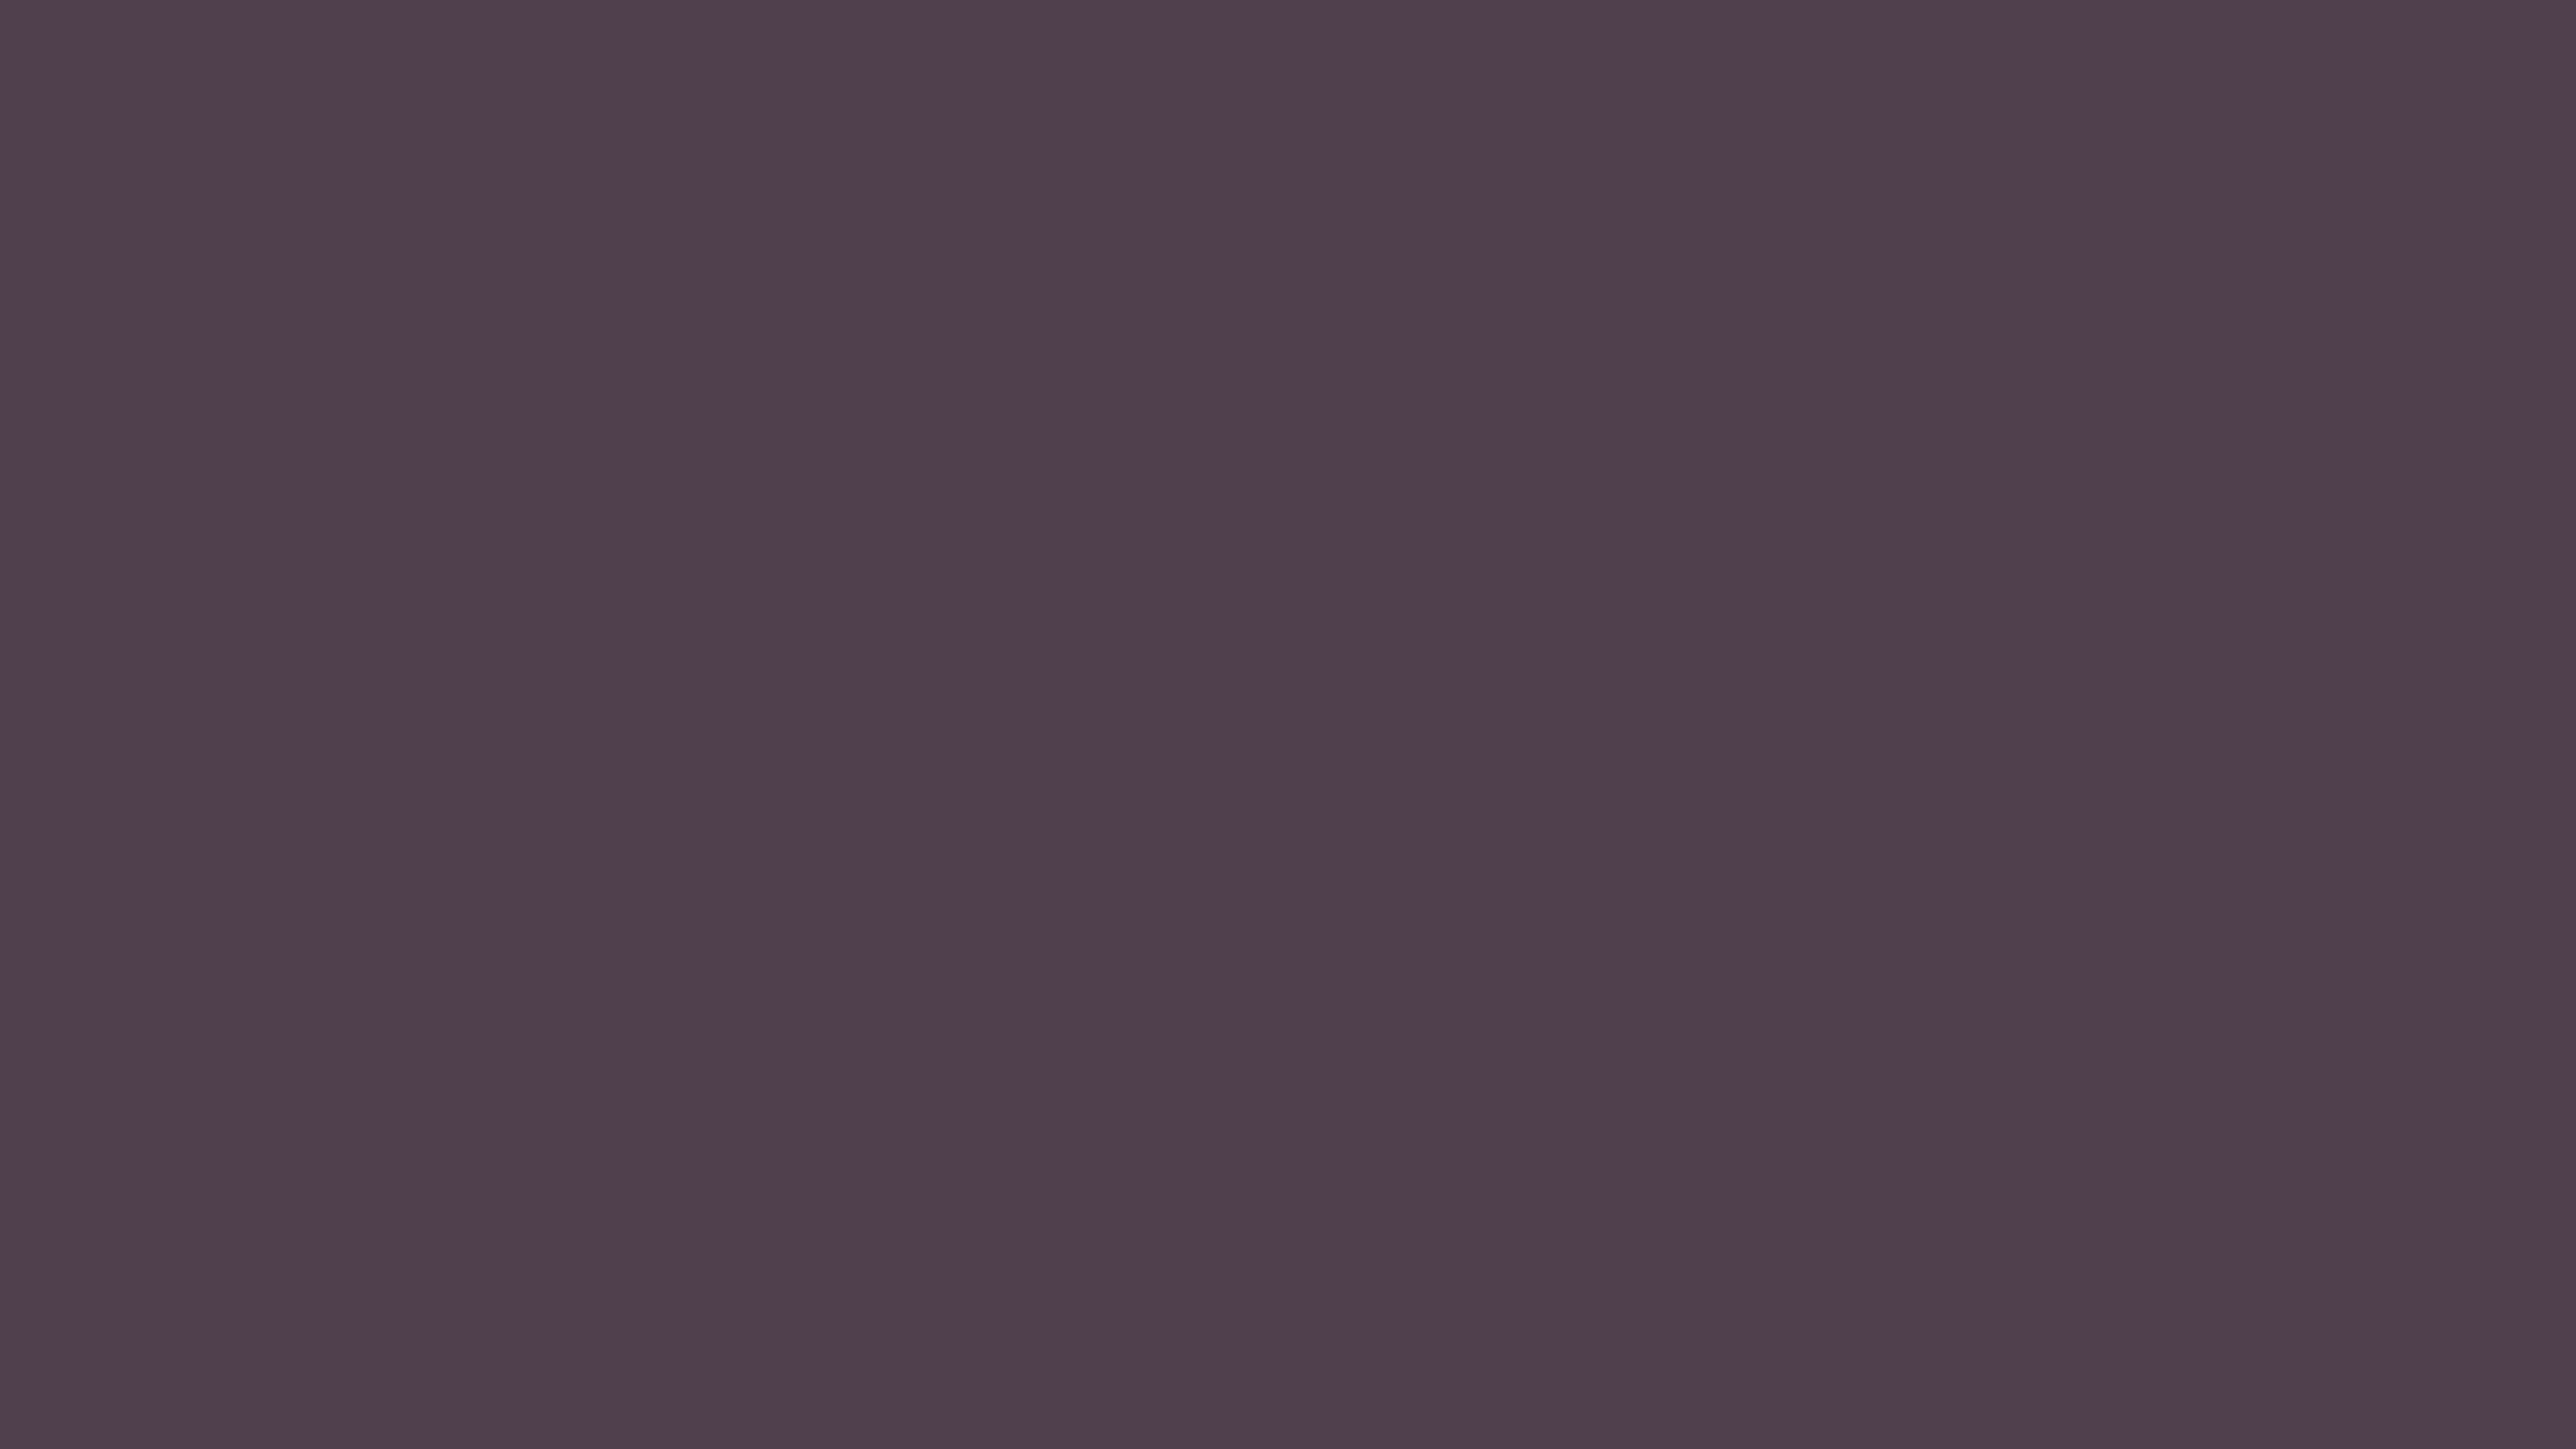 5120x2880 Purple Taupe Solid Color Background